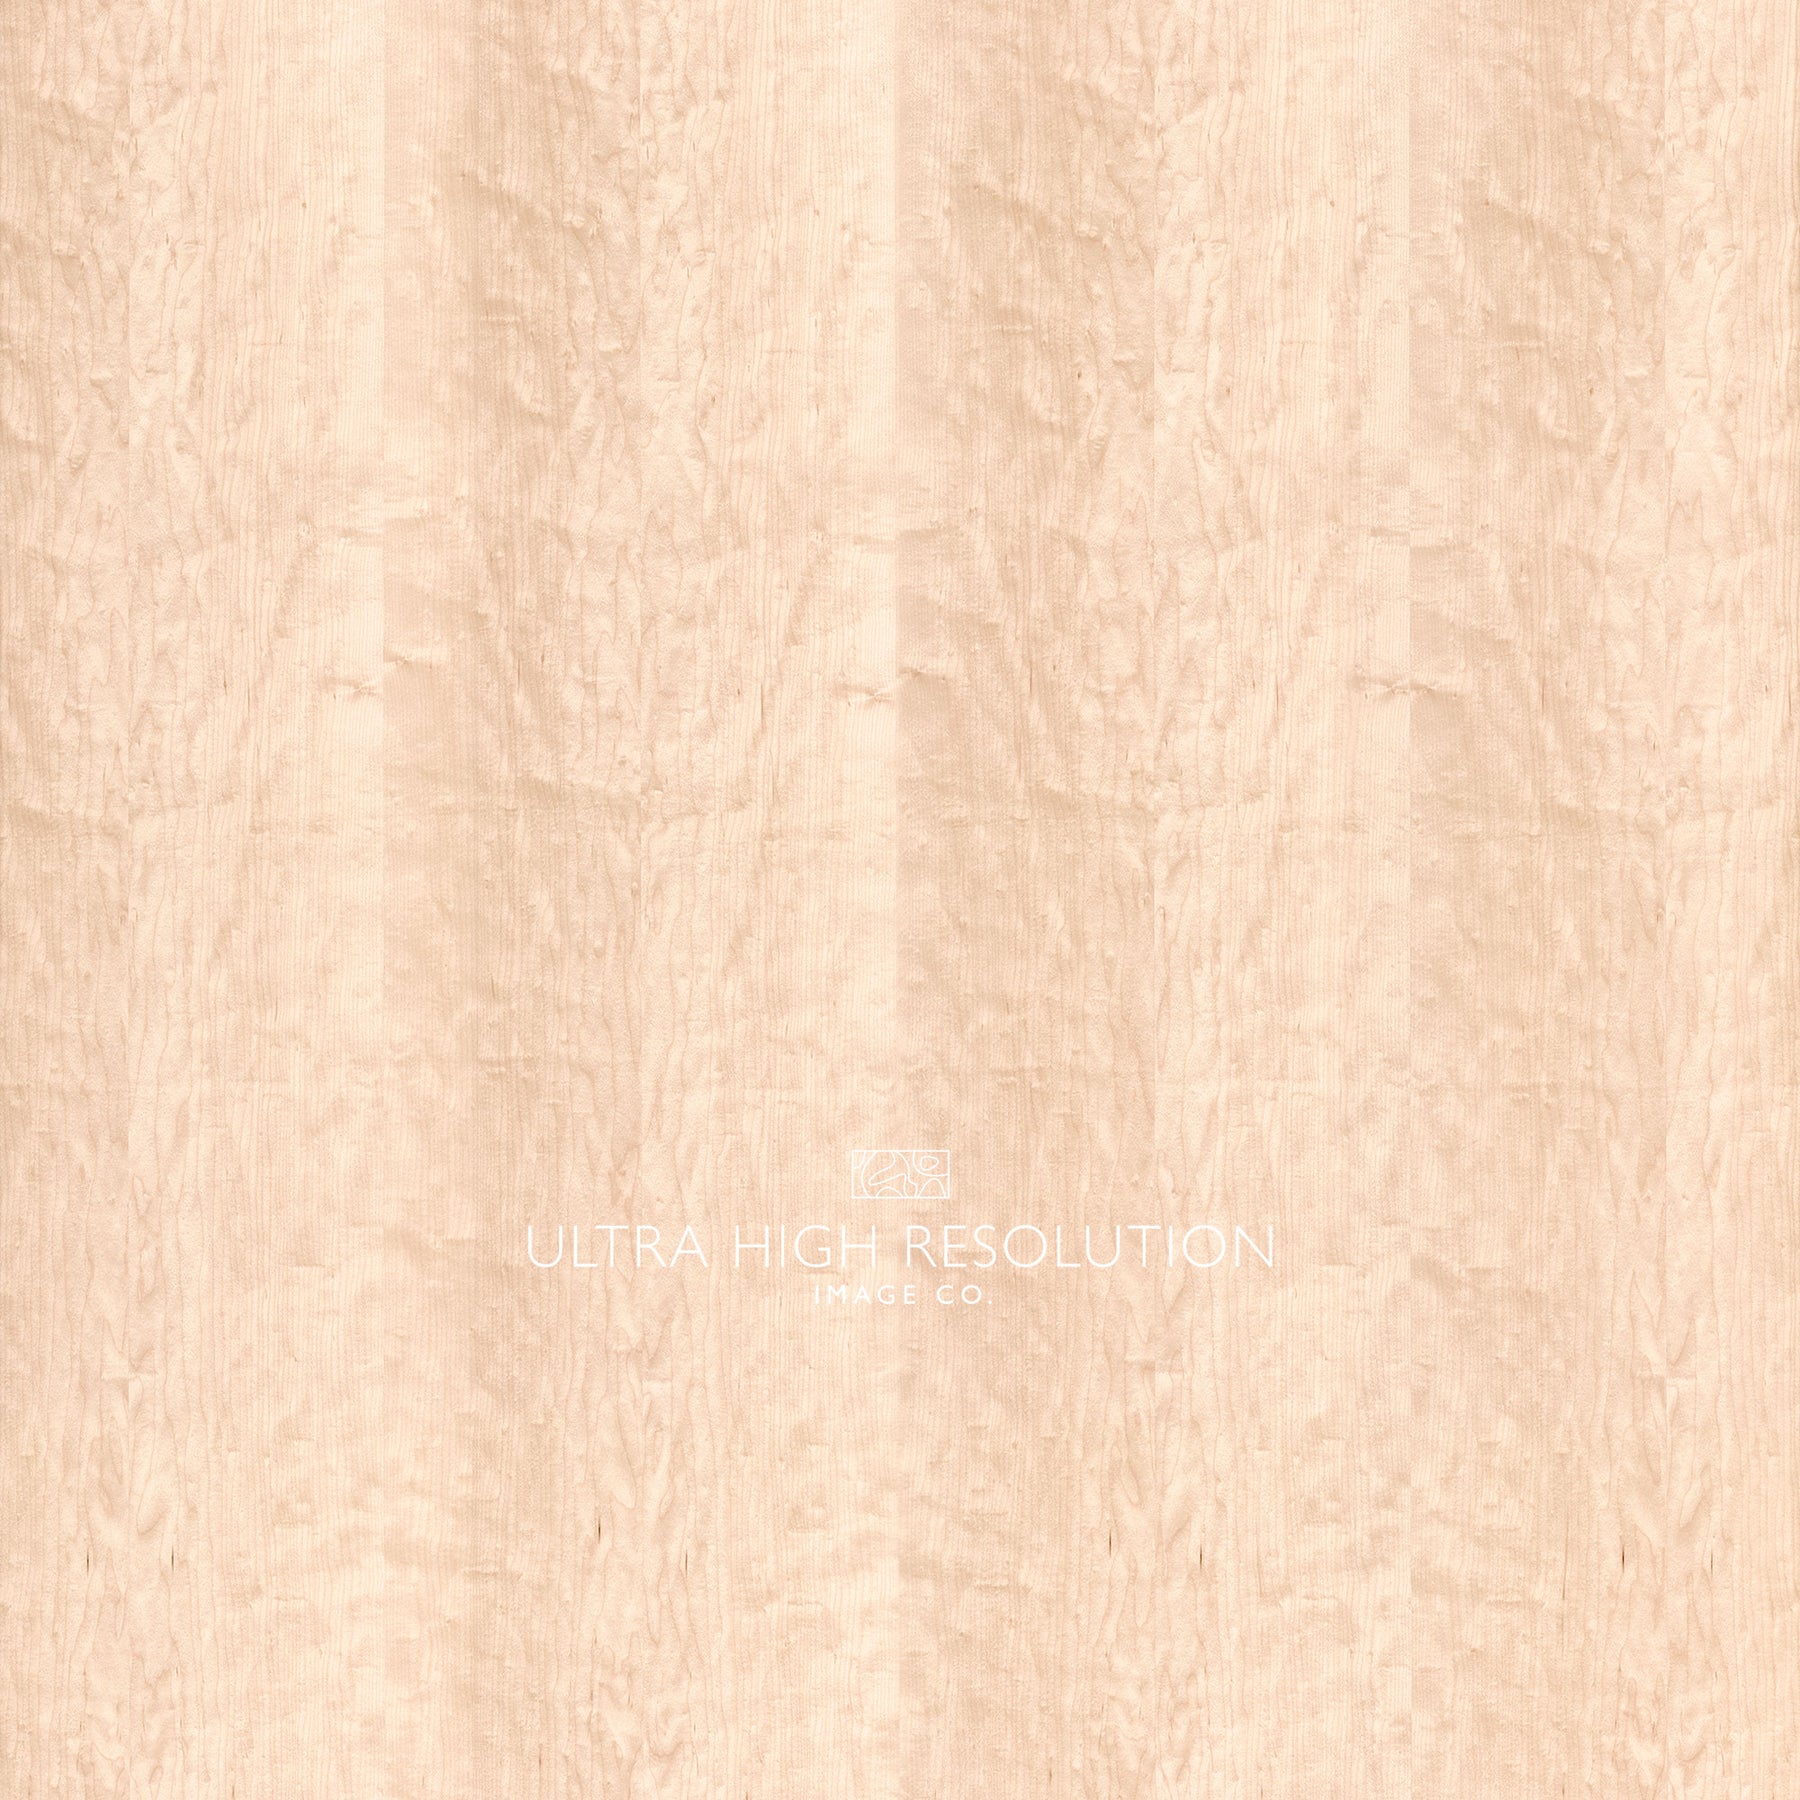 Maple Natural Wood Texture (702cm x 338cm) – Ultra High Resolution